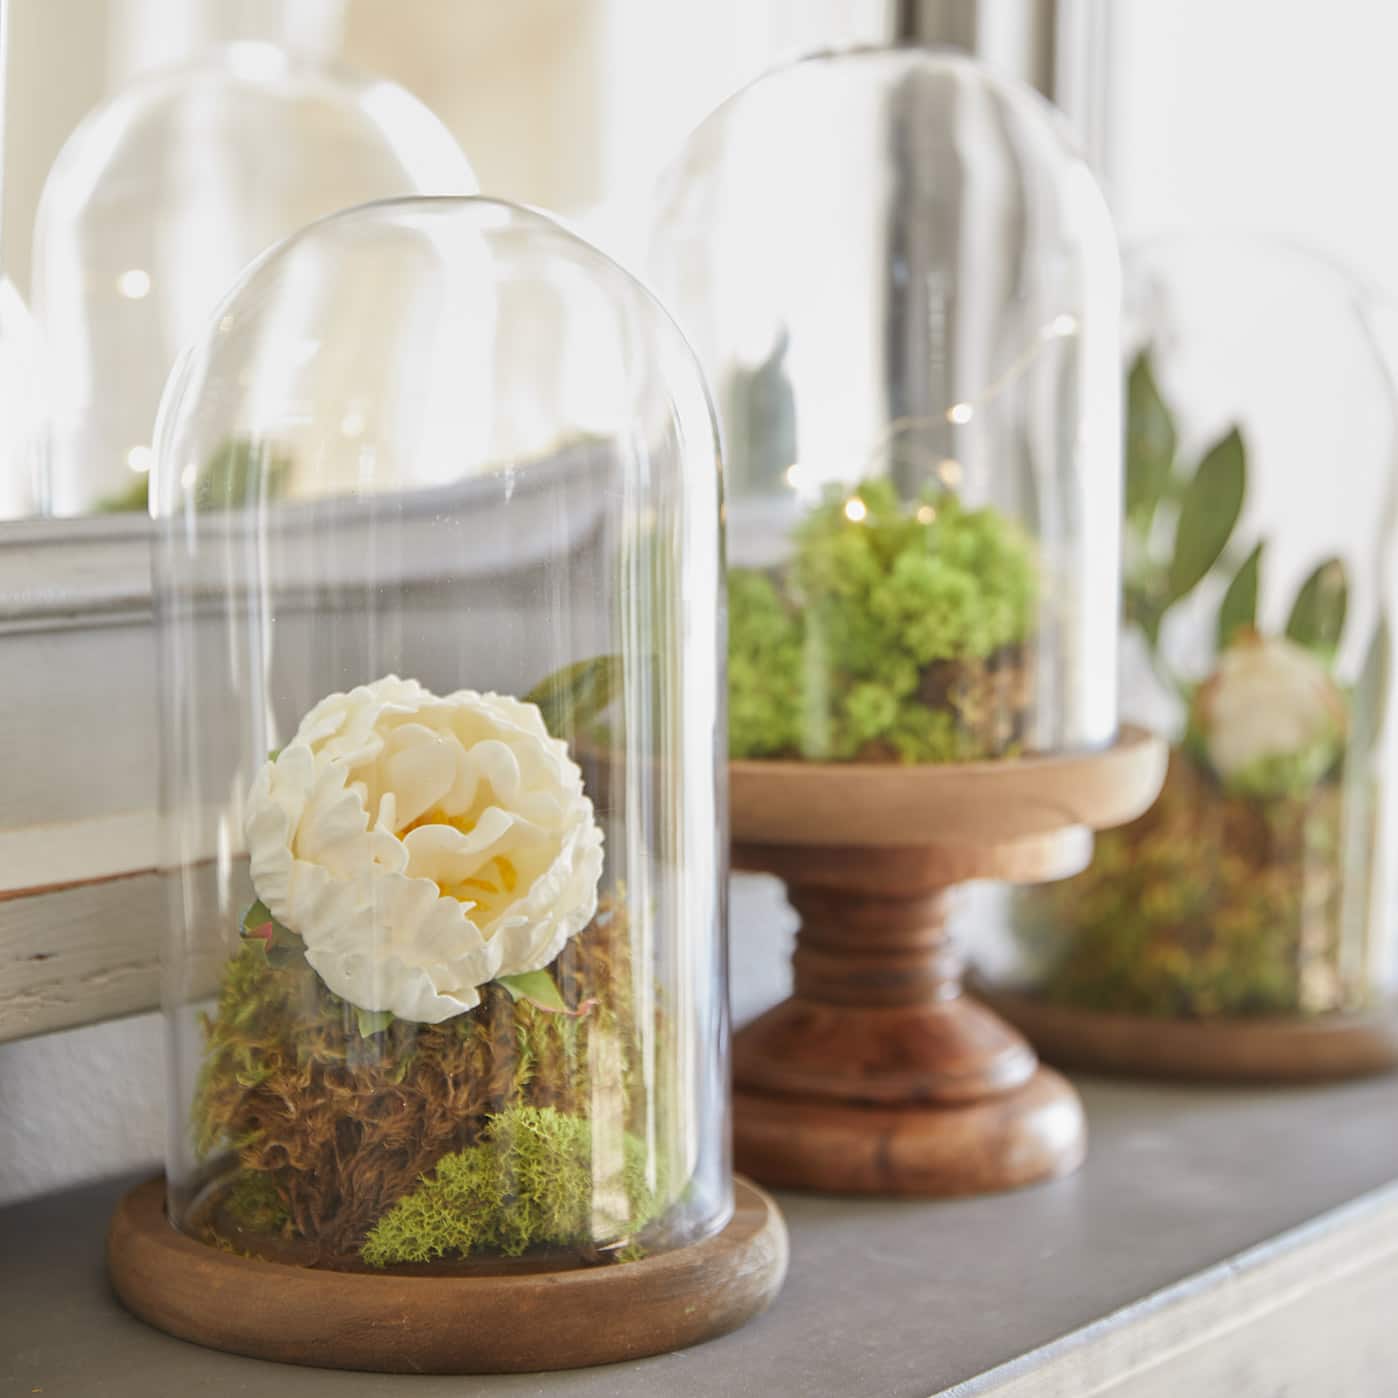 Floral and Mossy Cloches